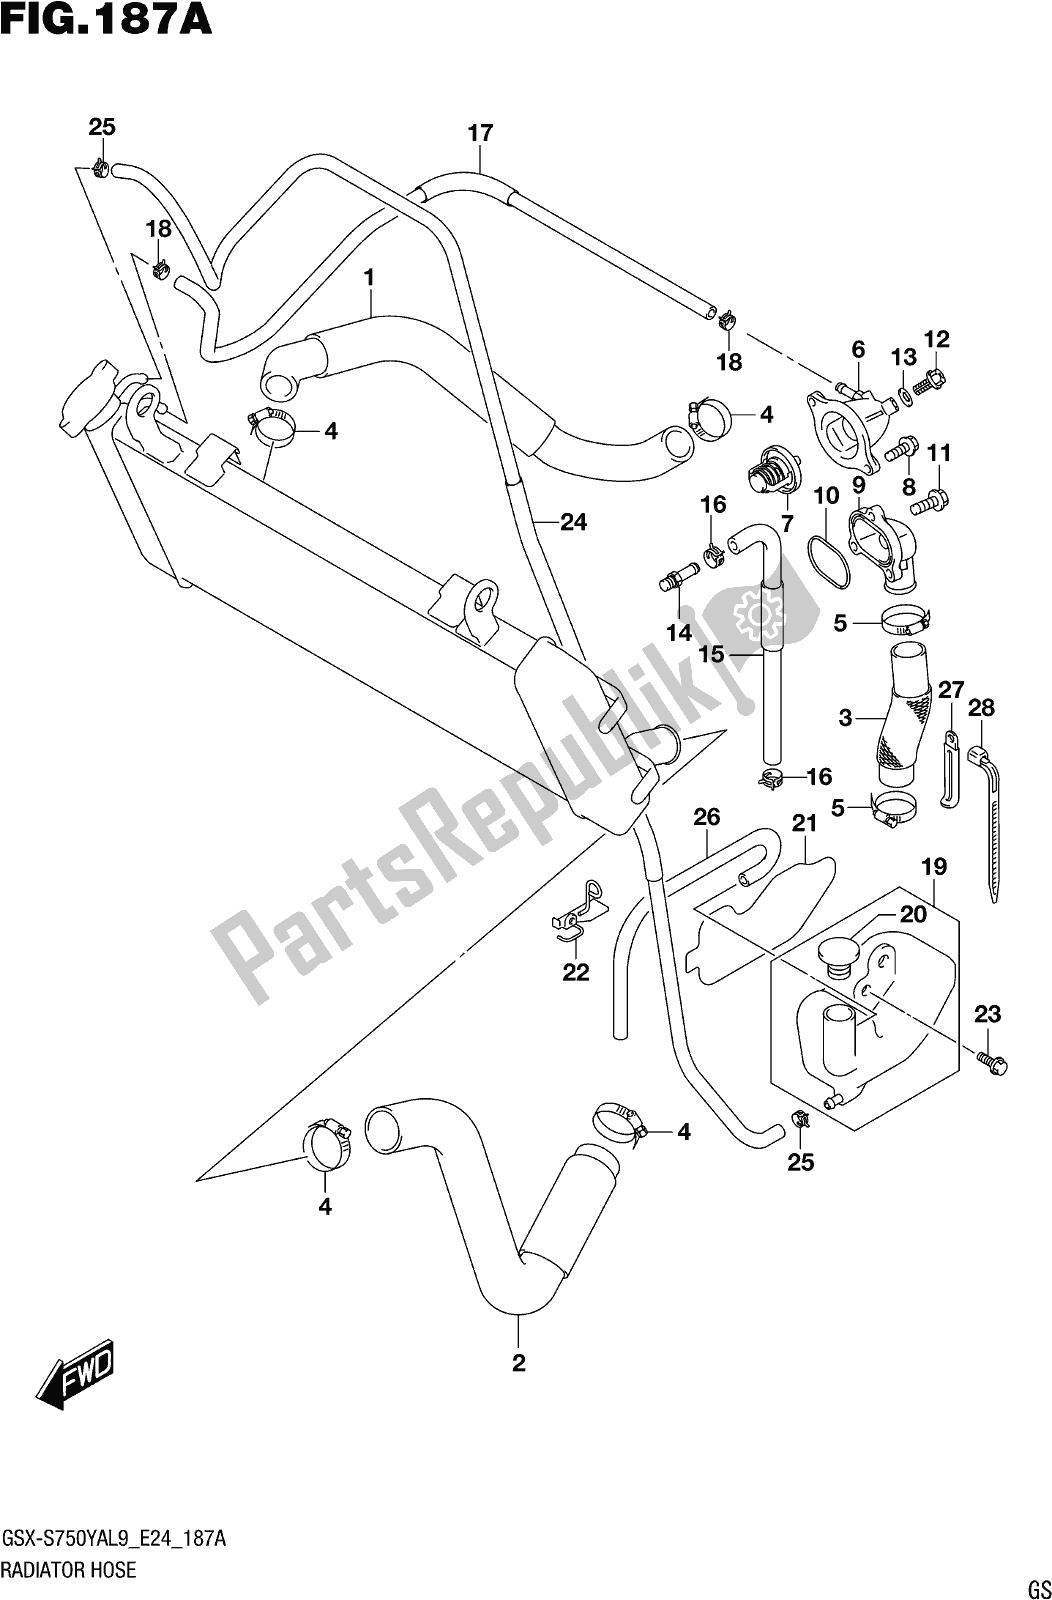 All parts for the Fig. 187a Radiator Hose of the Suzuki Gsx-s 750 YA 2019